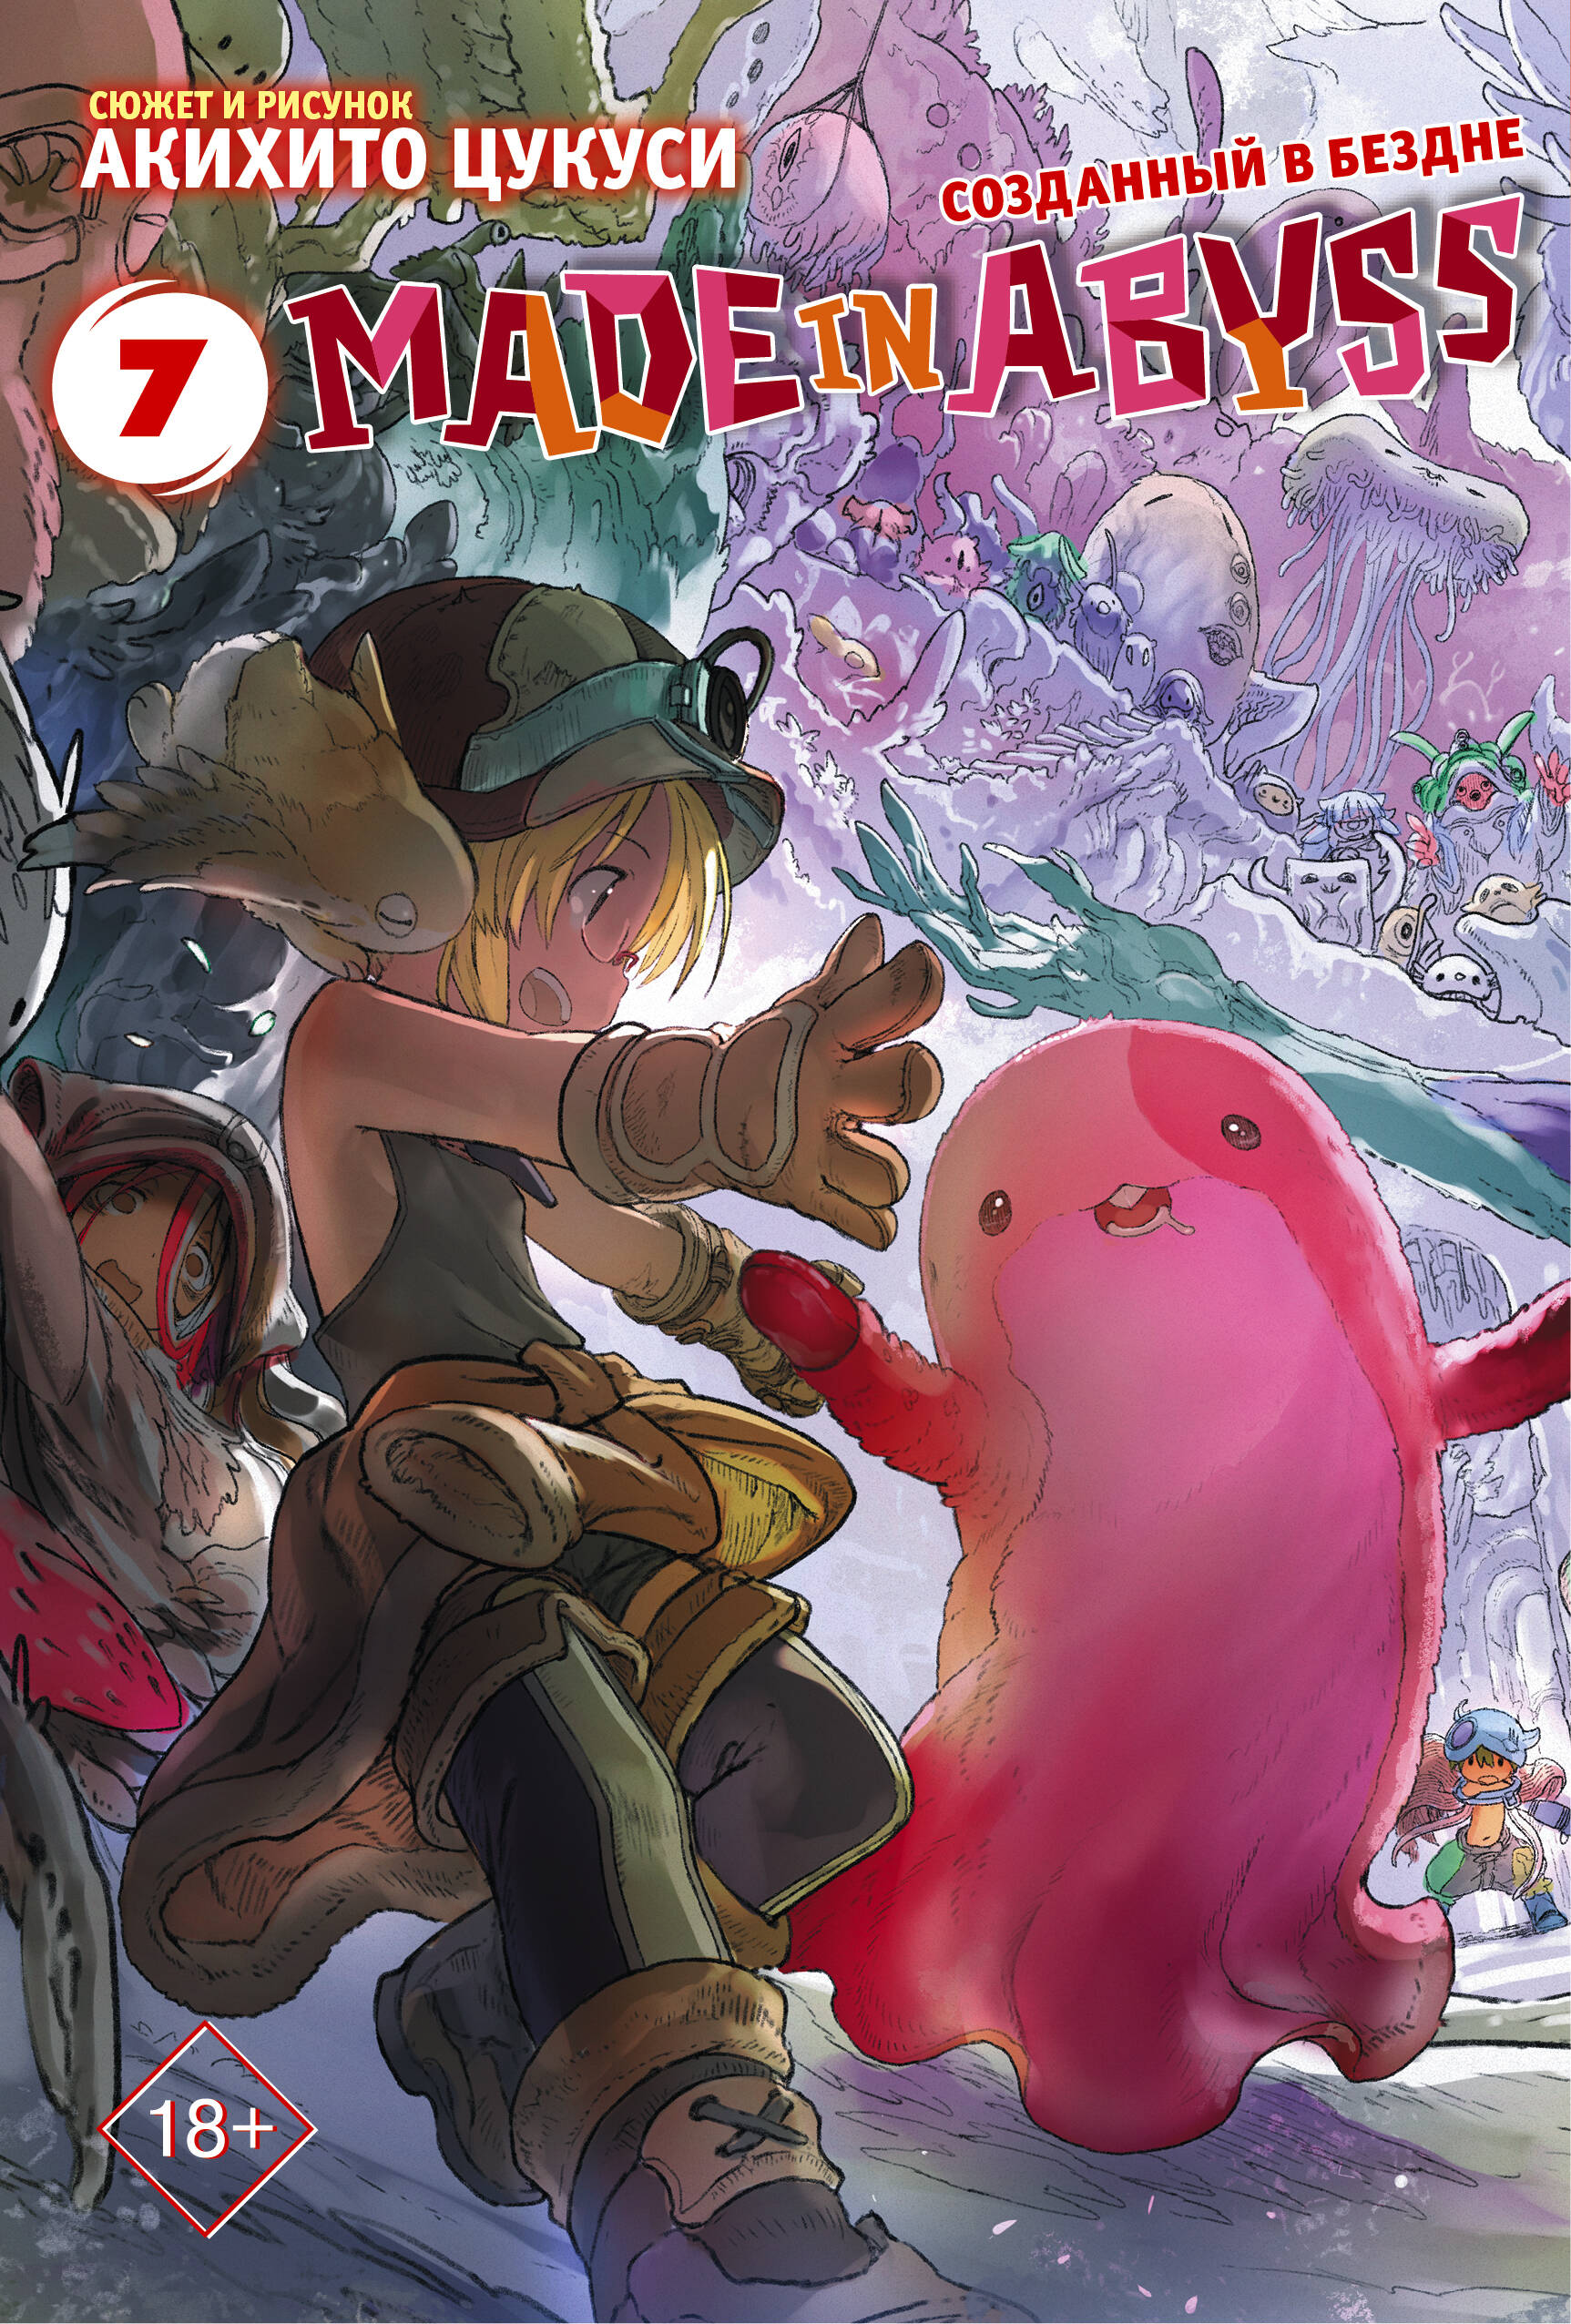 Made in Abyss. Созданный в бездне. Том 7 набор манга made in abyss созданный в бездне том 4 закладка i m an anime person магнитная 6 pack